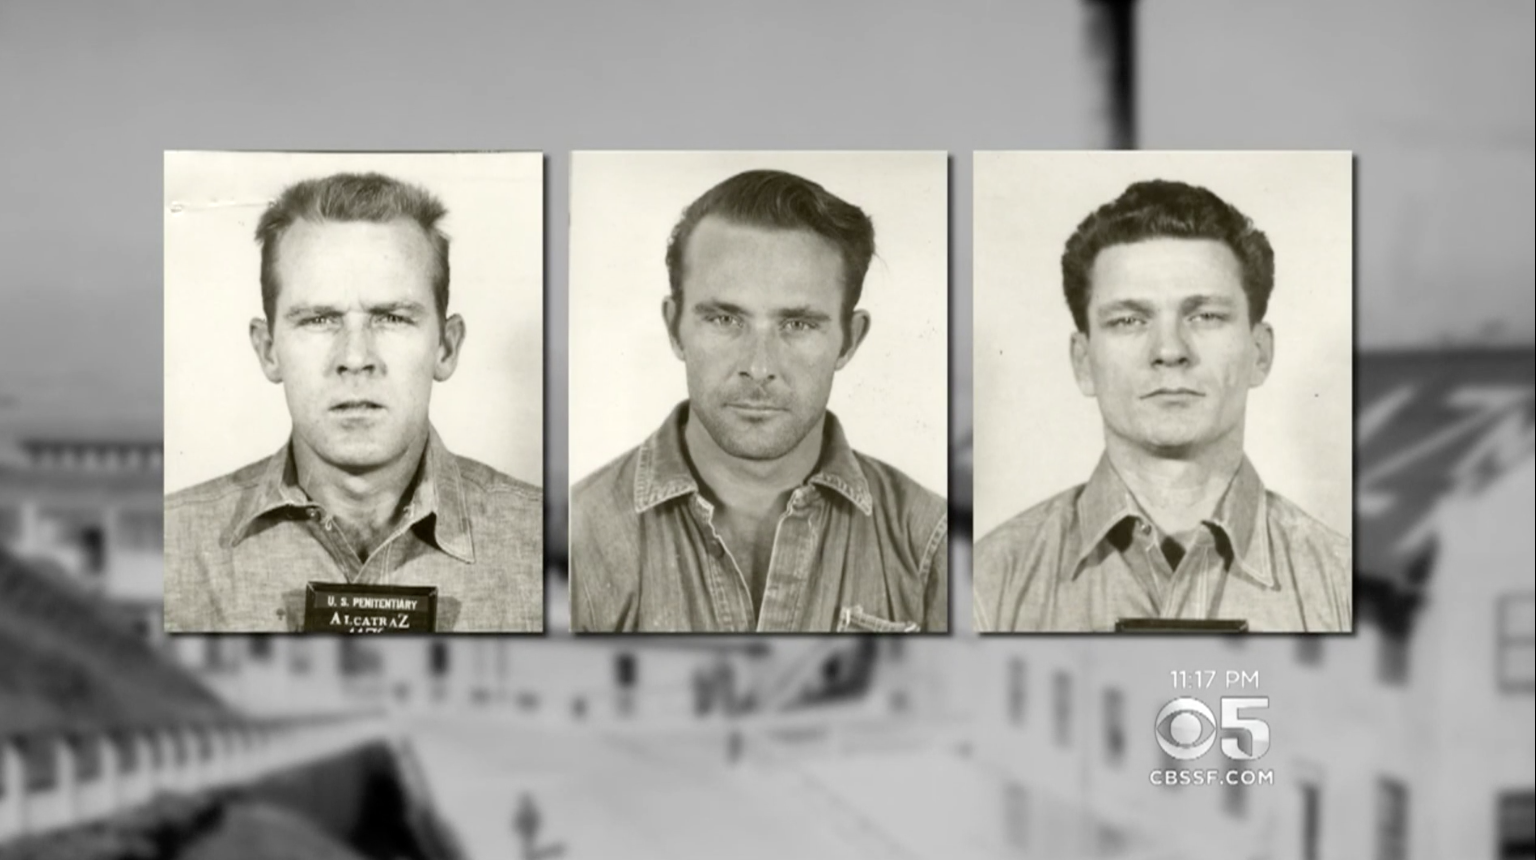 Escape from Alcatraz: Is this man one of three prisoners who broke out?